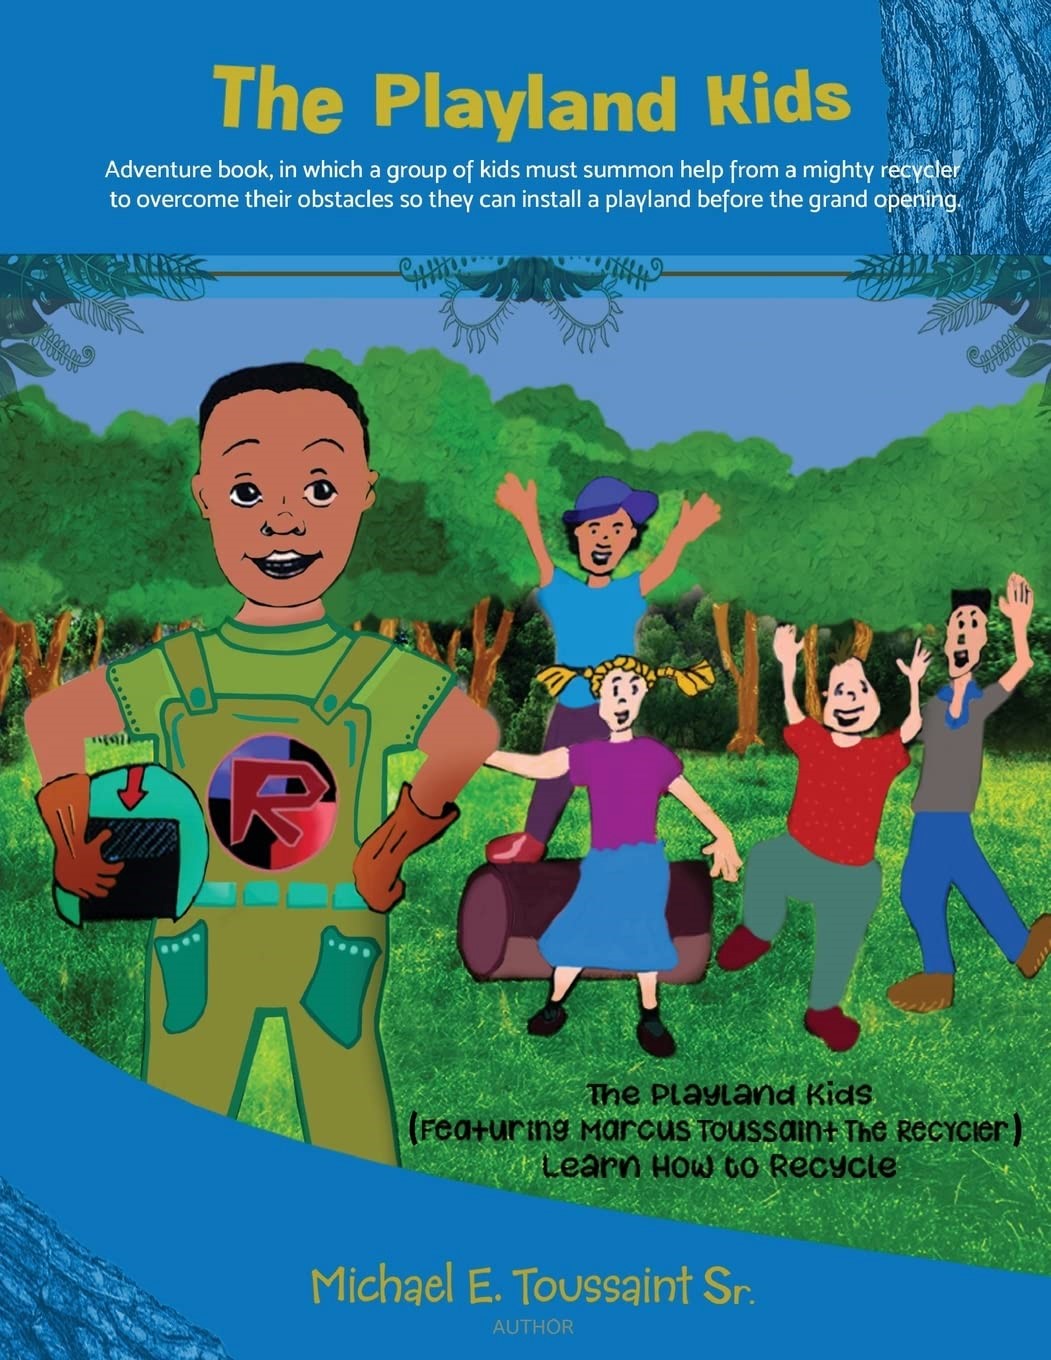 New Children's Book "The Playland Kids" Inspires Young Readers to Embrace Recycling and Eco-Friendly Playgrounds